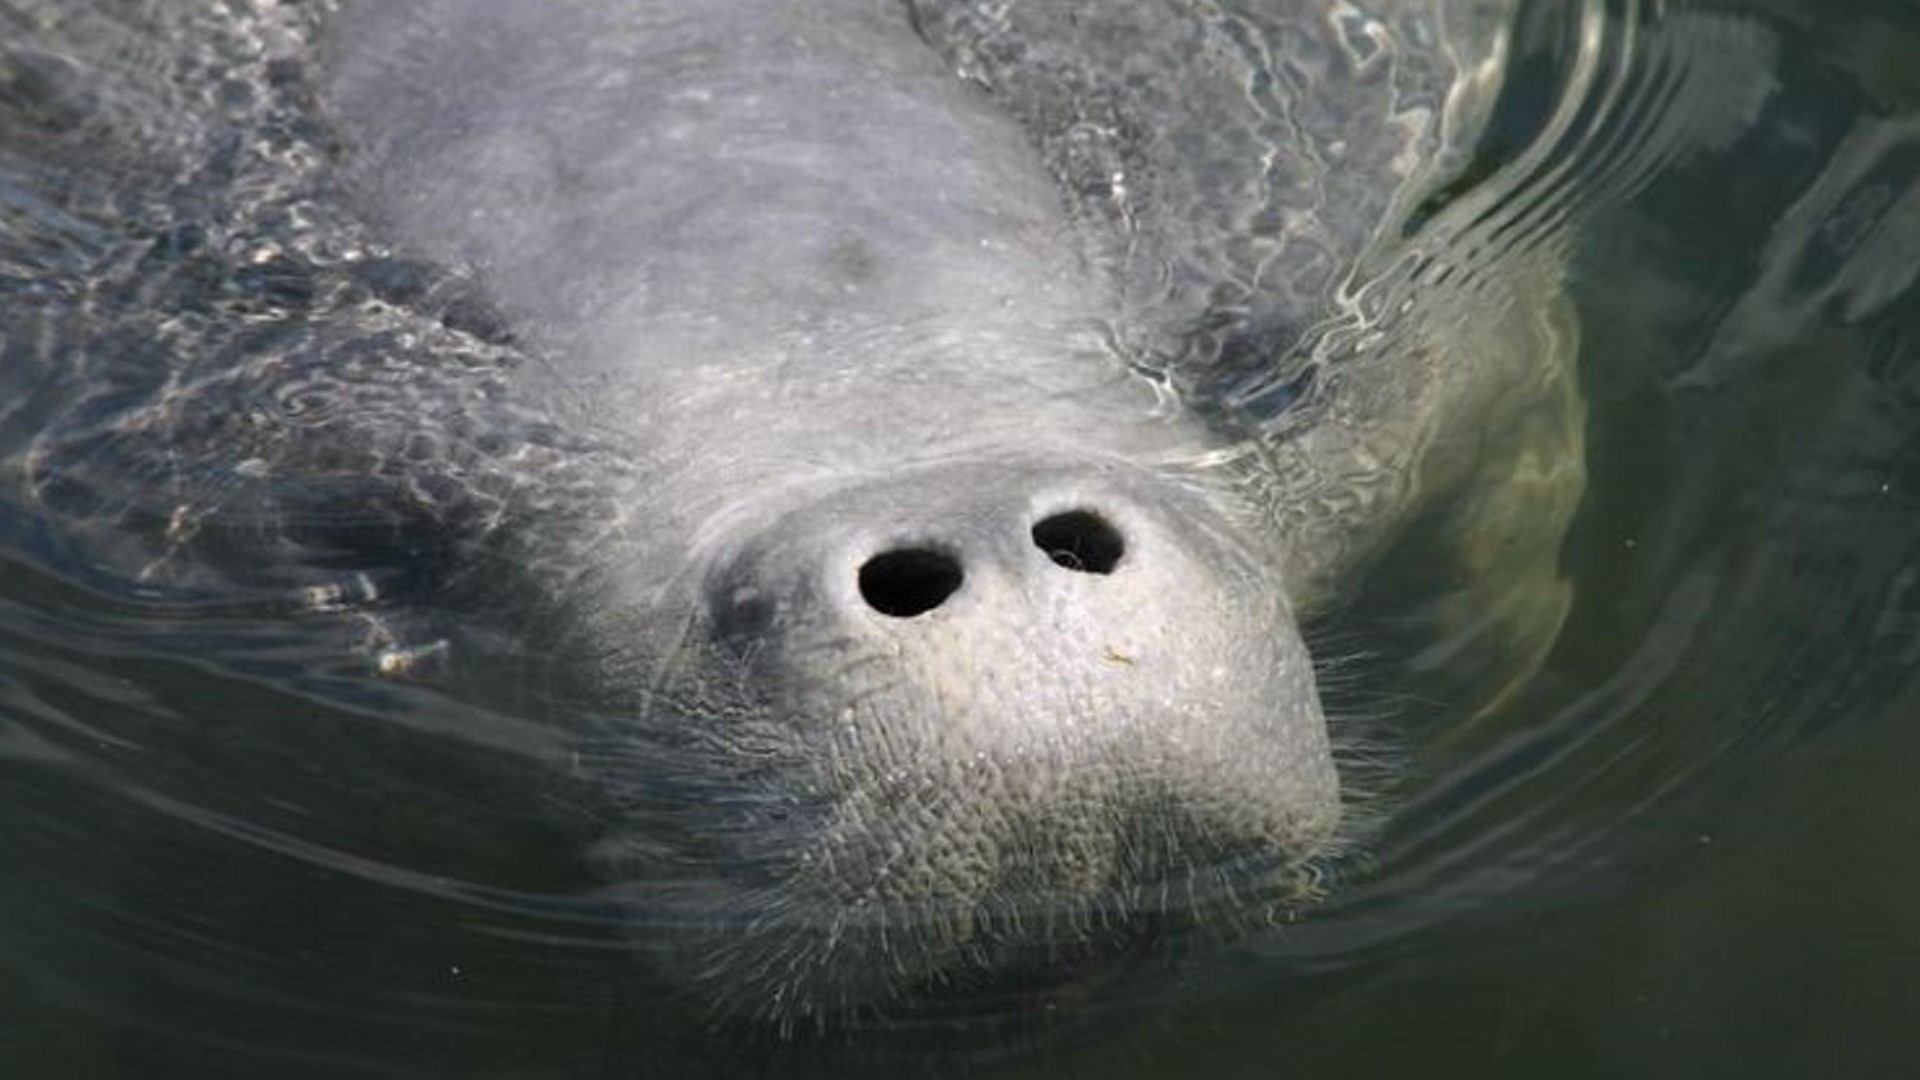 There will be a limited feeding trial for the sea cows at Indian River Lagoon.